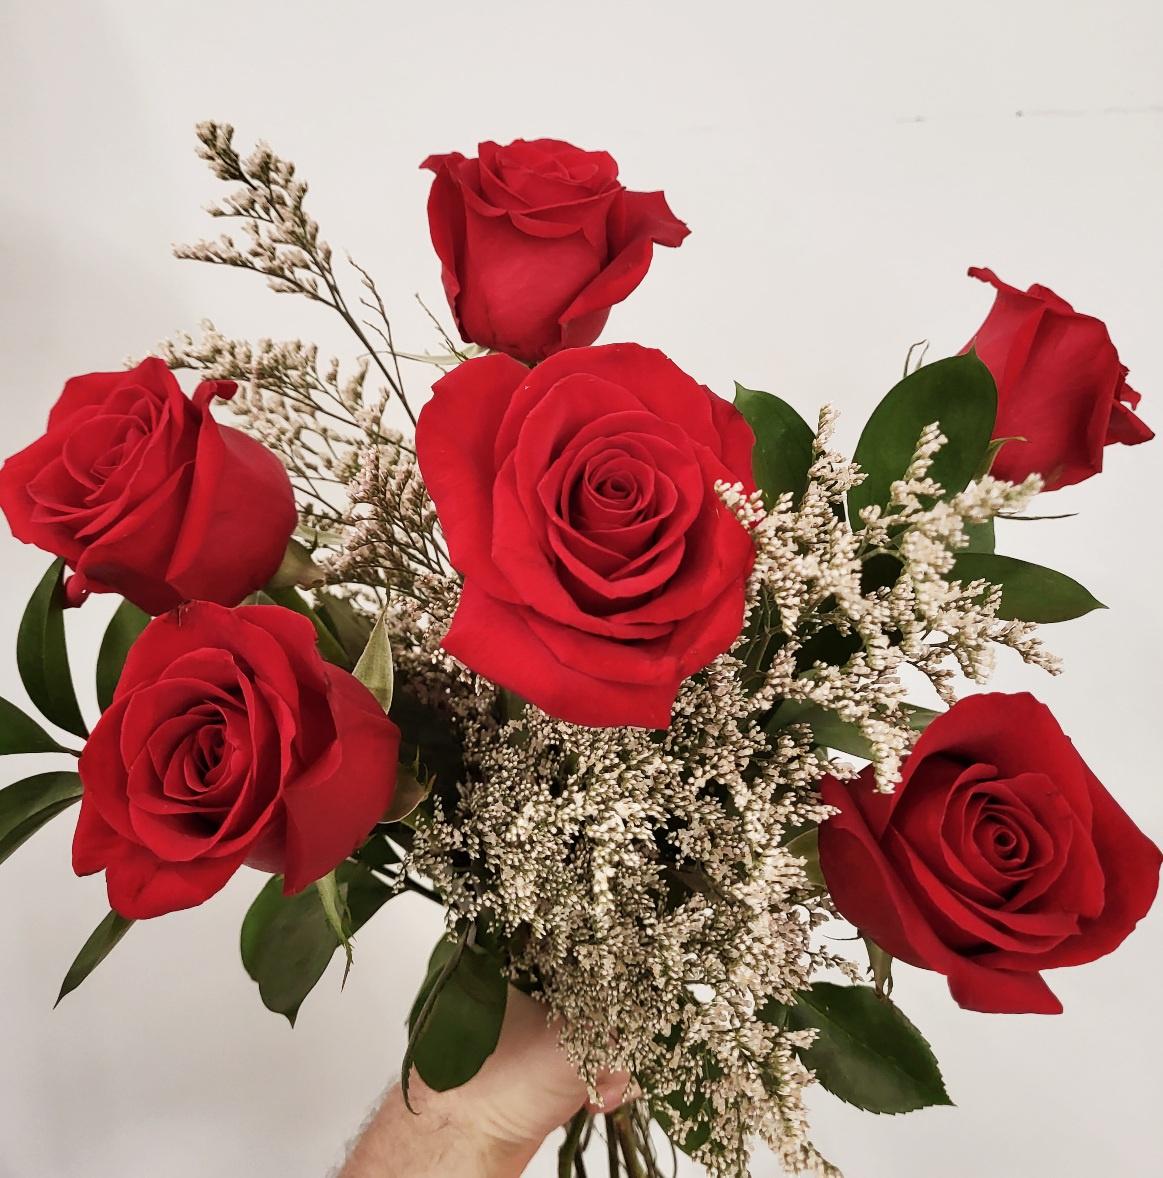 A dozen beautiful red roses hand-tied